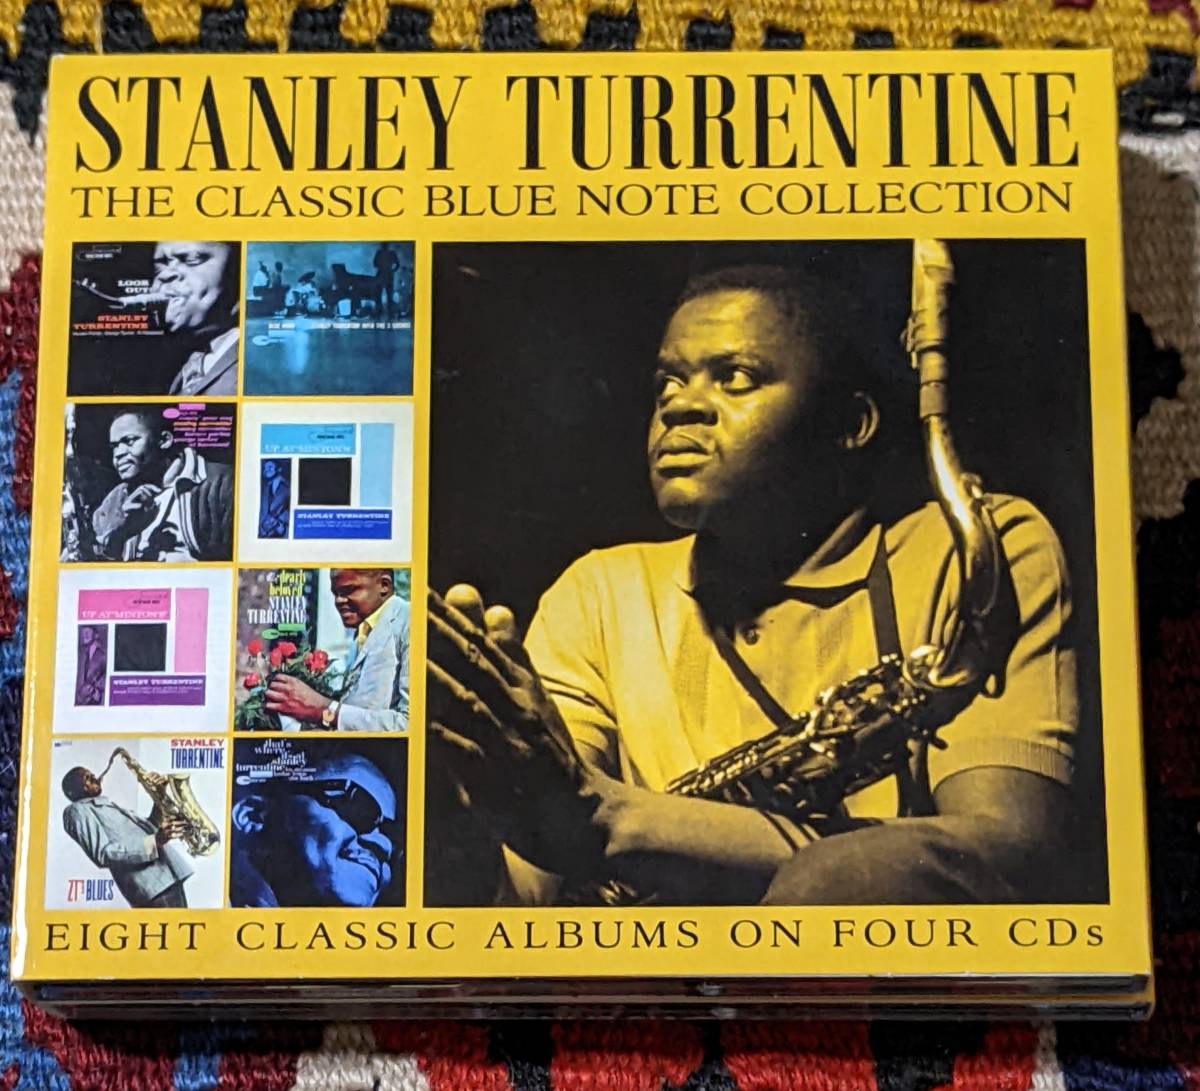 60's BLUE NOTE スタンリー・タレンタイン Stanley Turrentine (8in4 4枚組CD)/ The Classic Blue Note Collection EN4CD9170_画像6